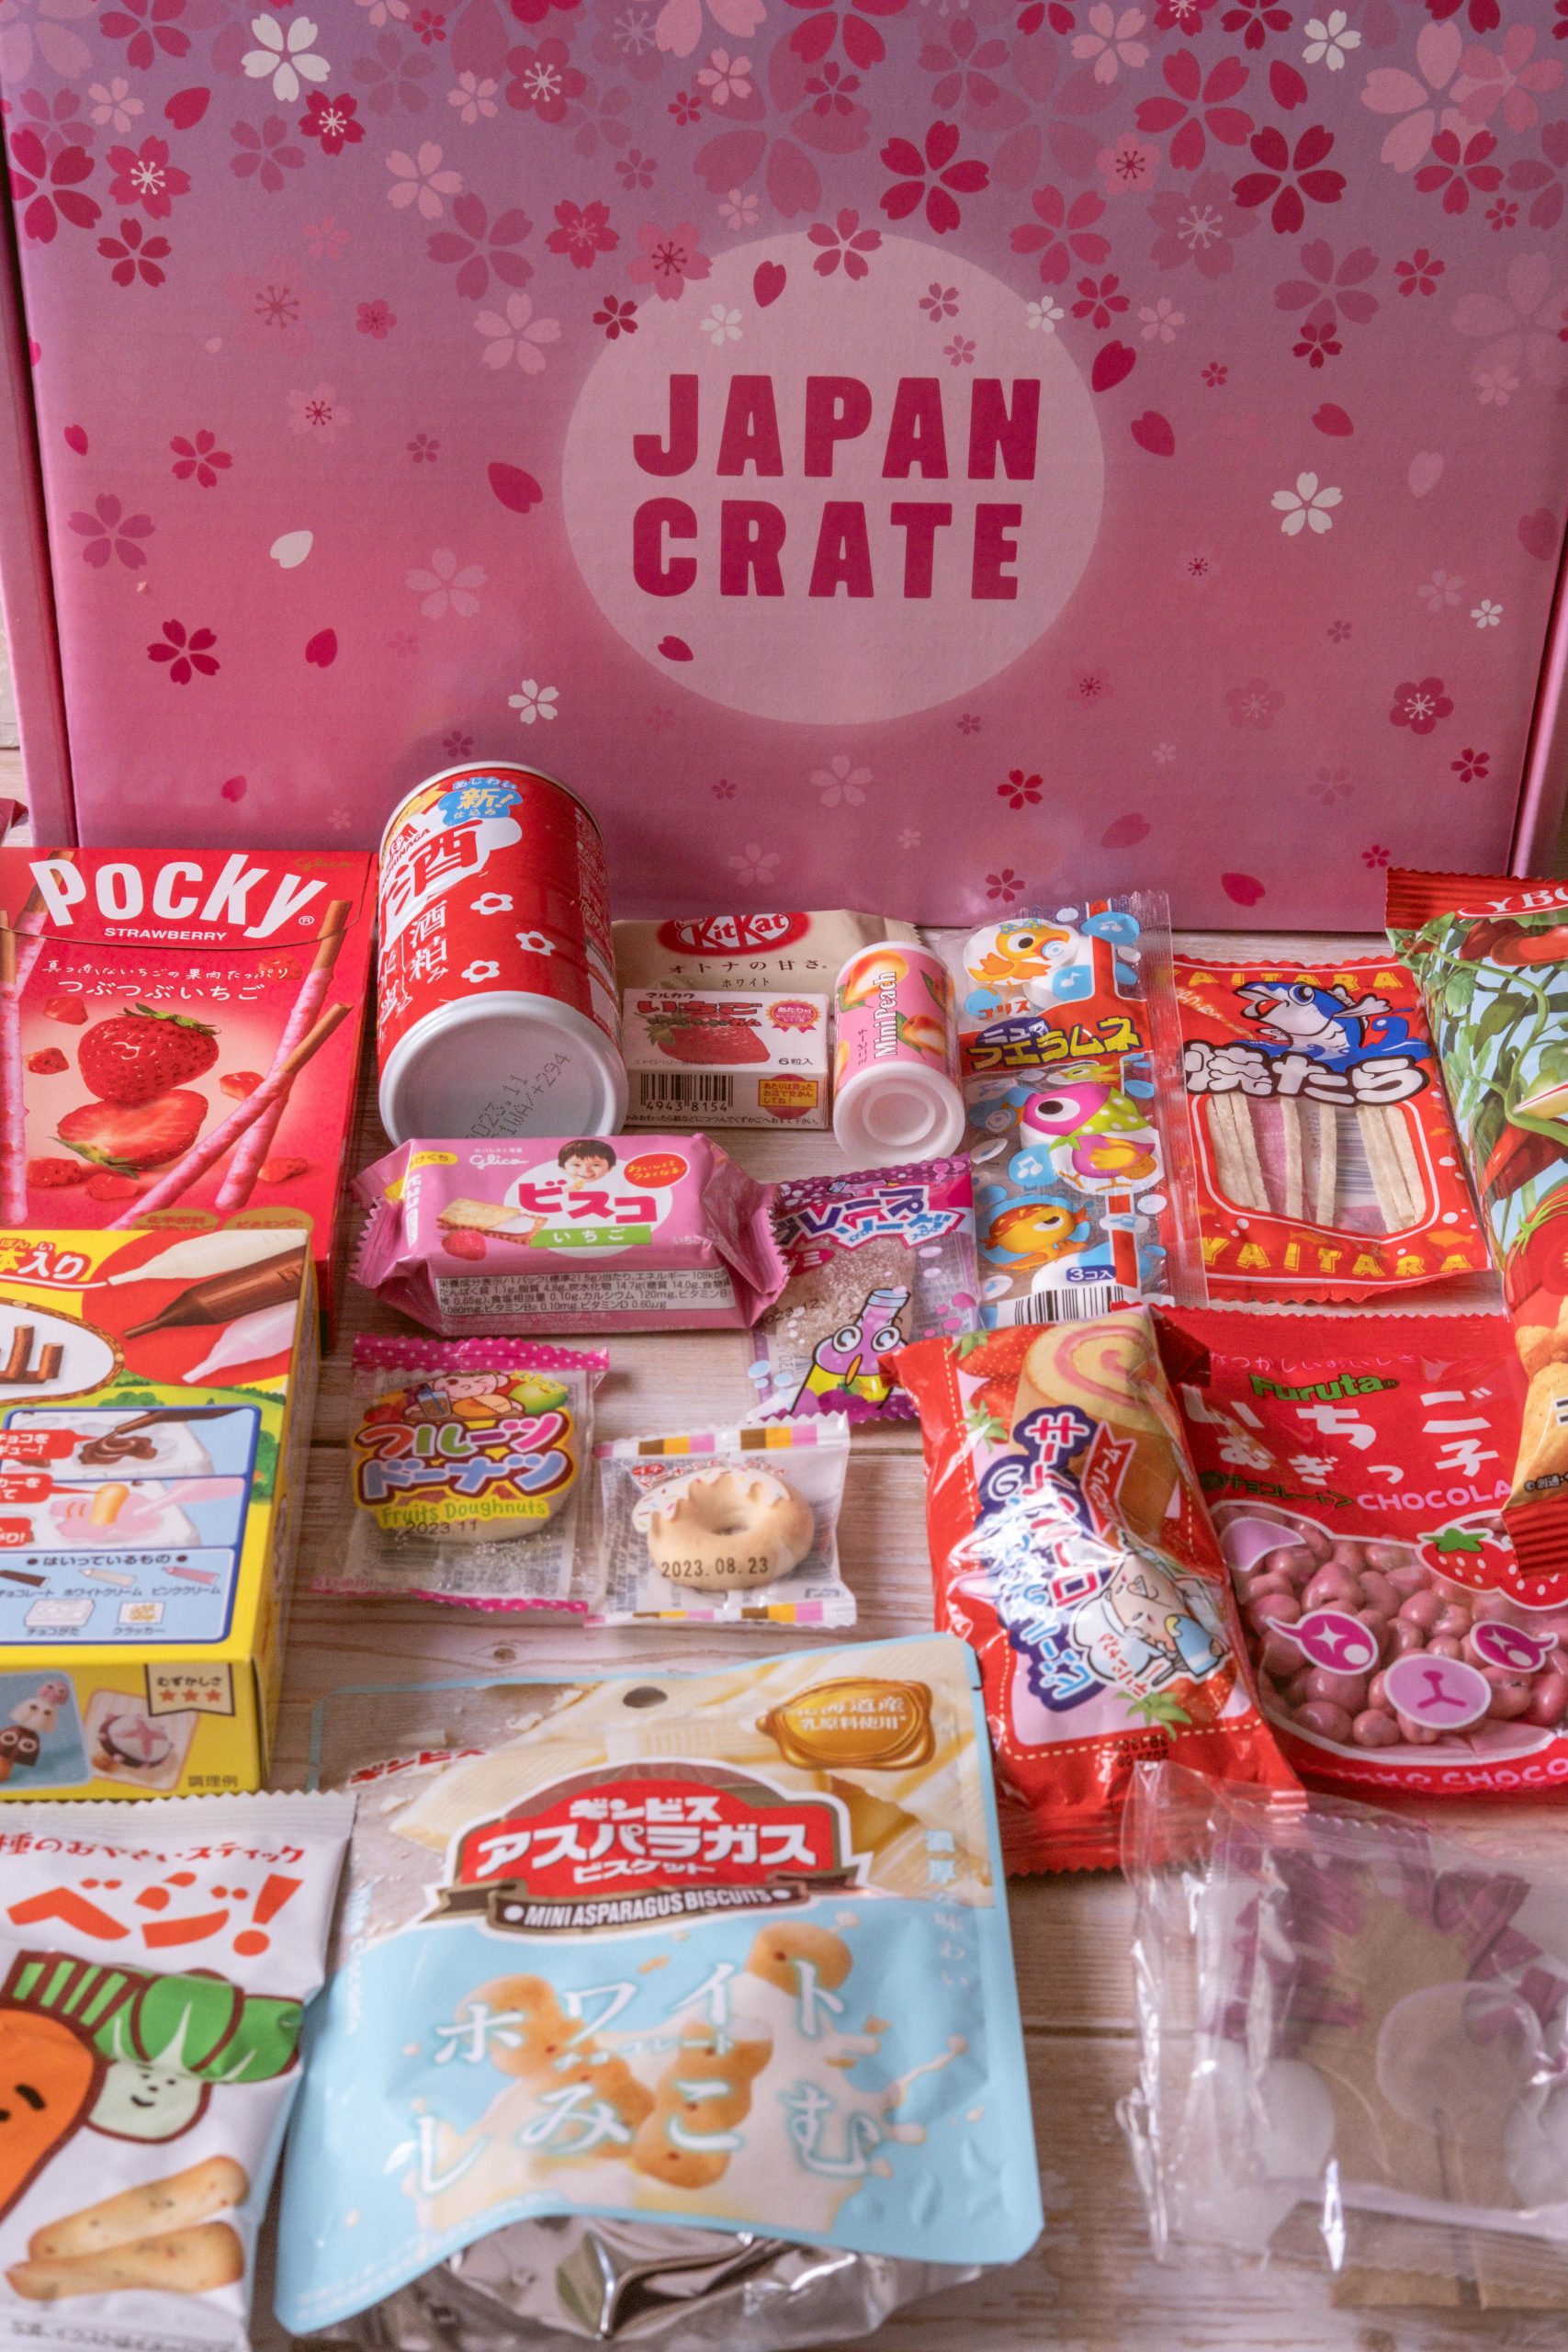 All the items inside my Japan crate box